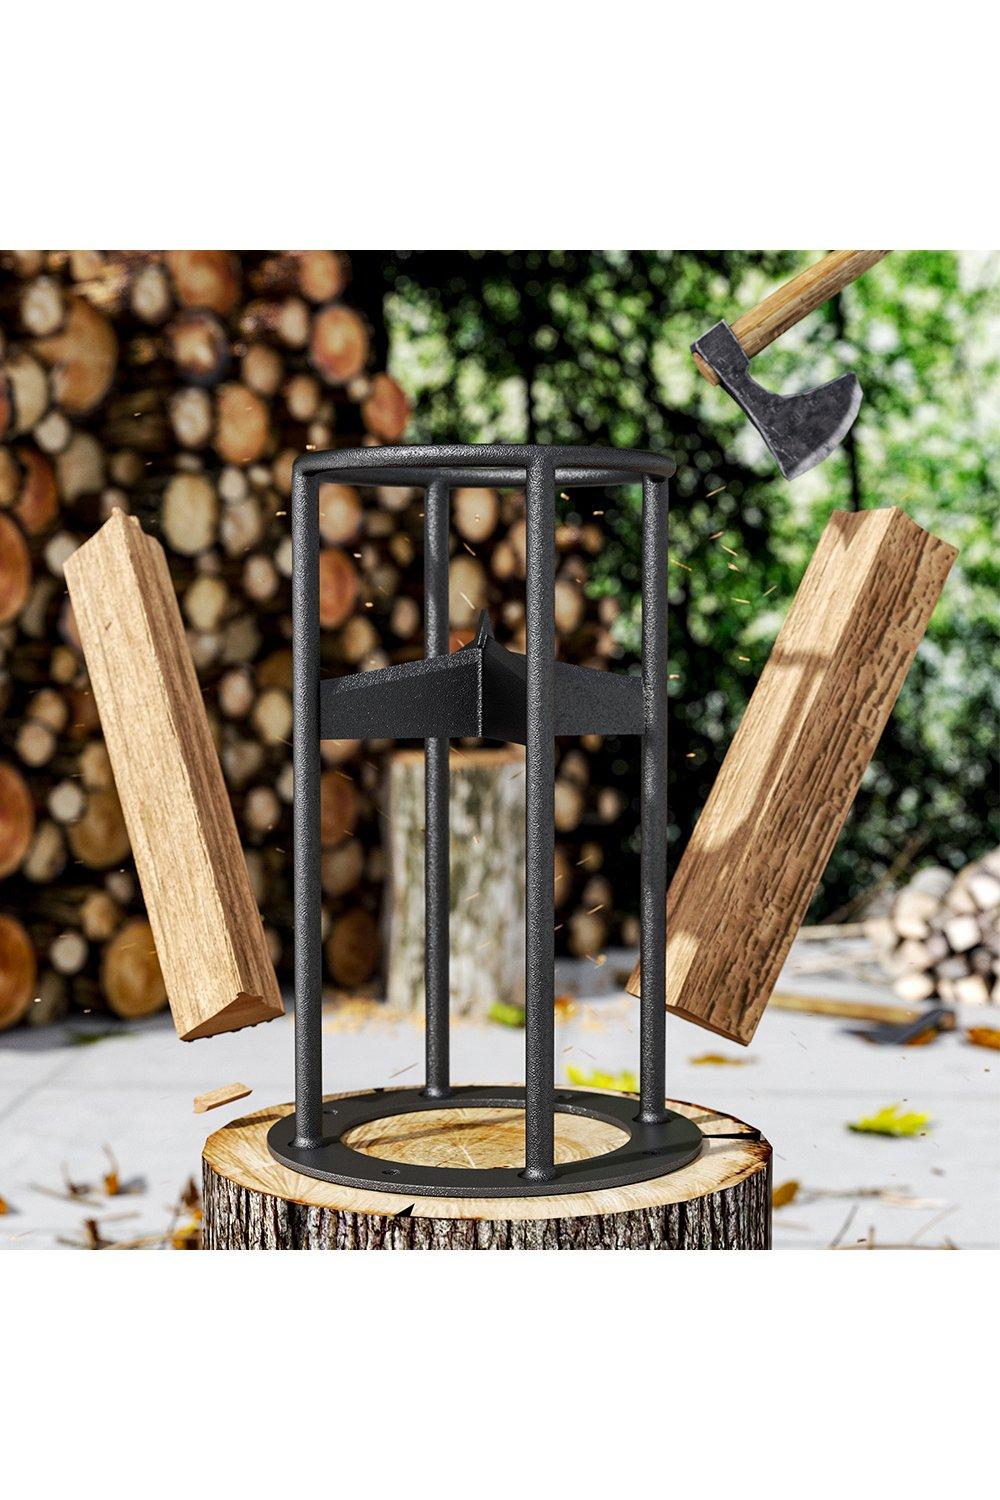 Carbon Steel Log Firewood Splitter for Quick Separation of Firewood Tools